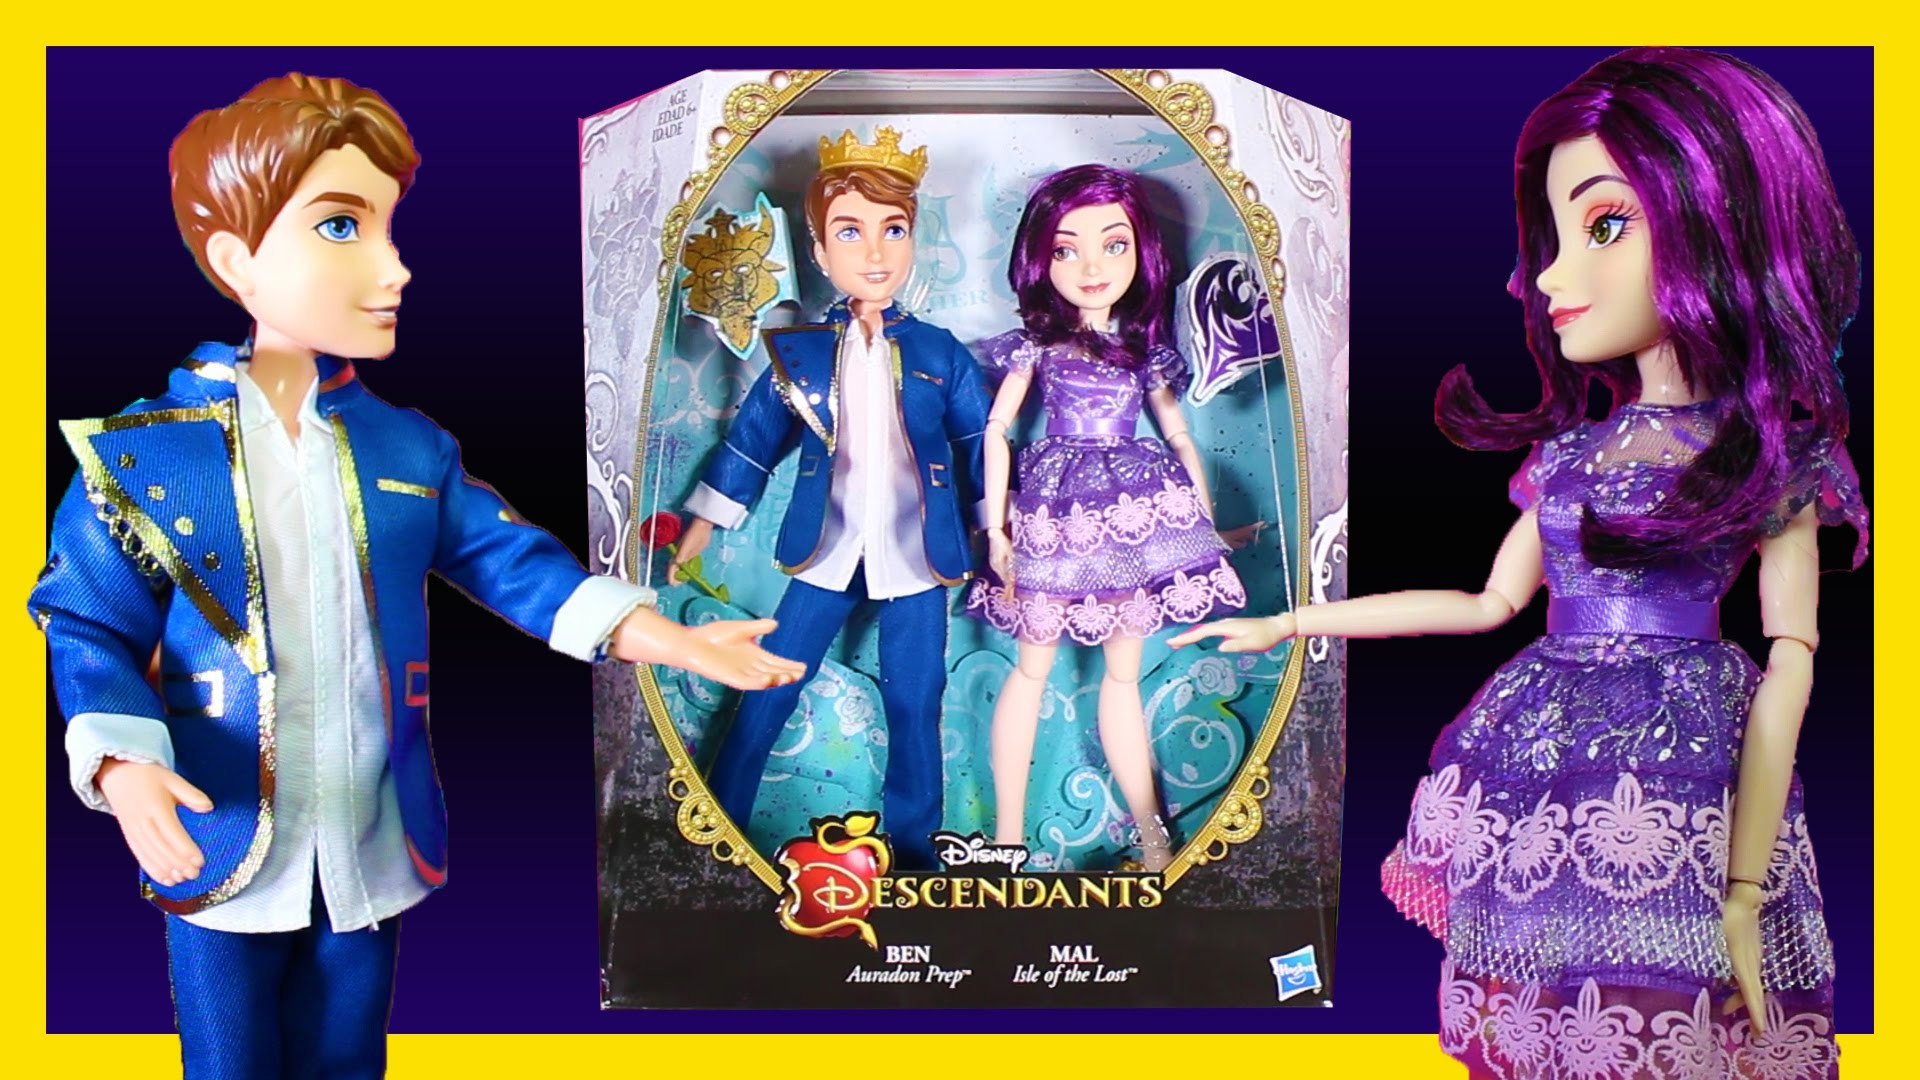 1920x1080 Disney Descendants Mal and Ben 2 Pack Dolls Toy Review Disney Channel Movie  - YouTube